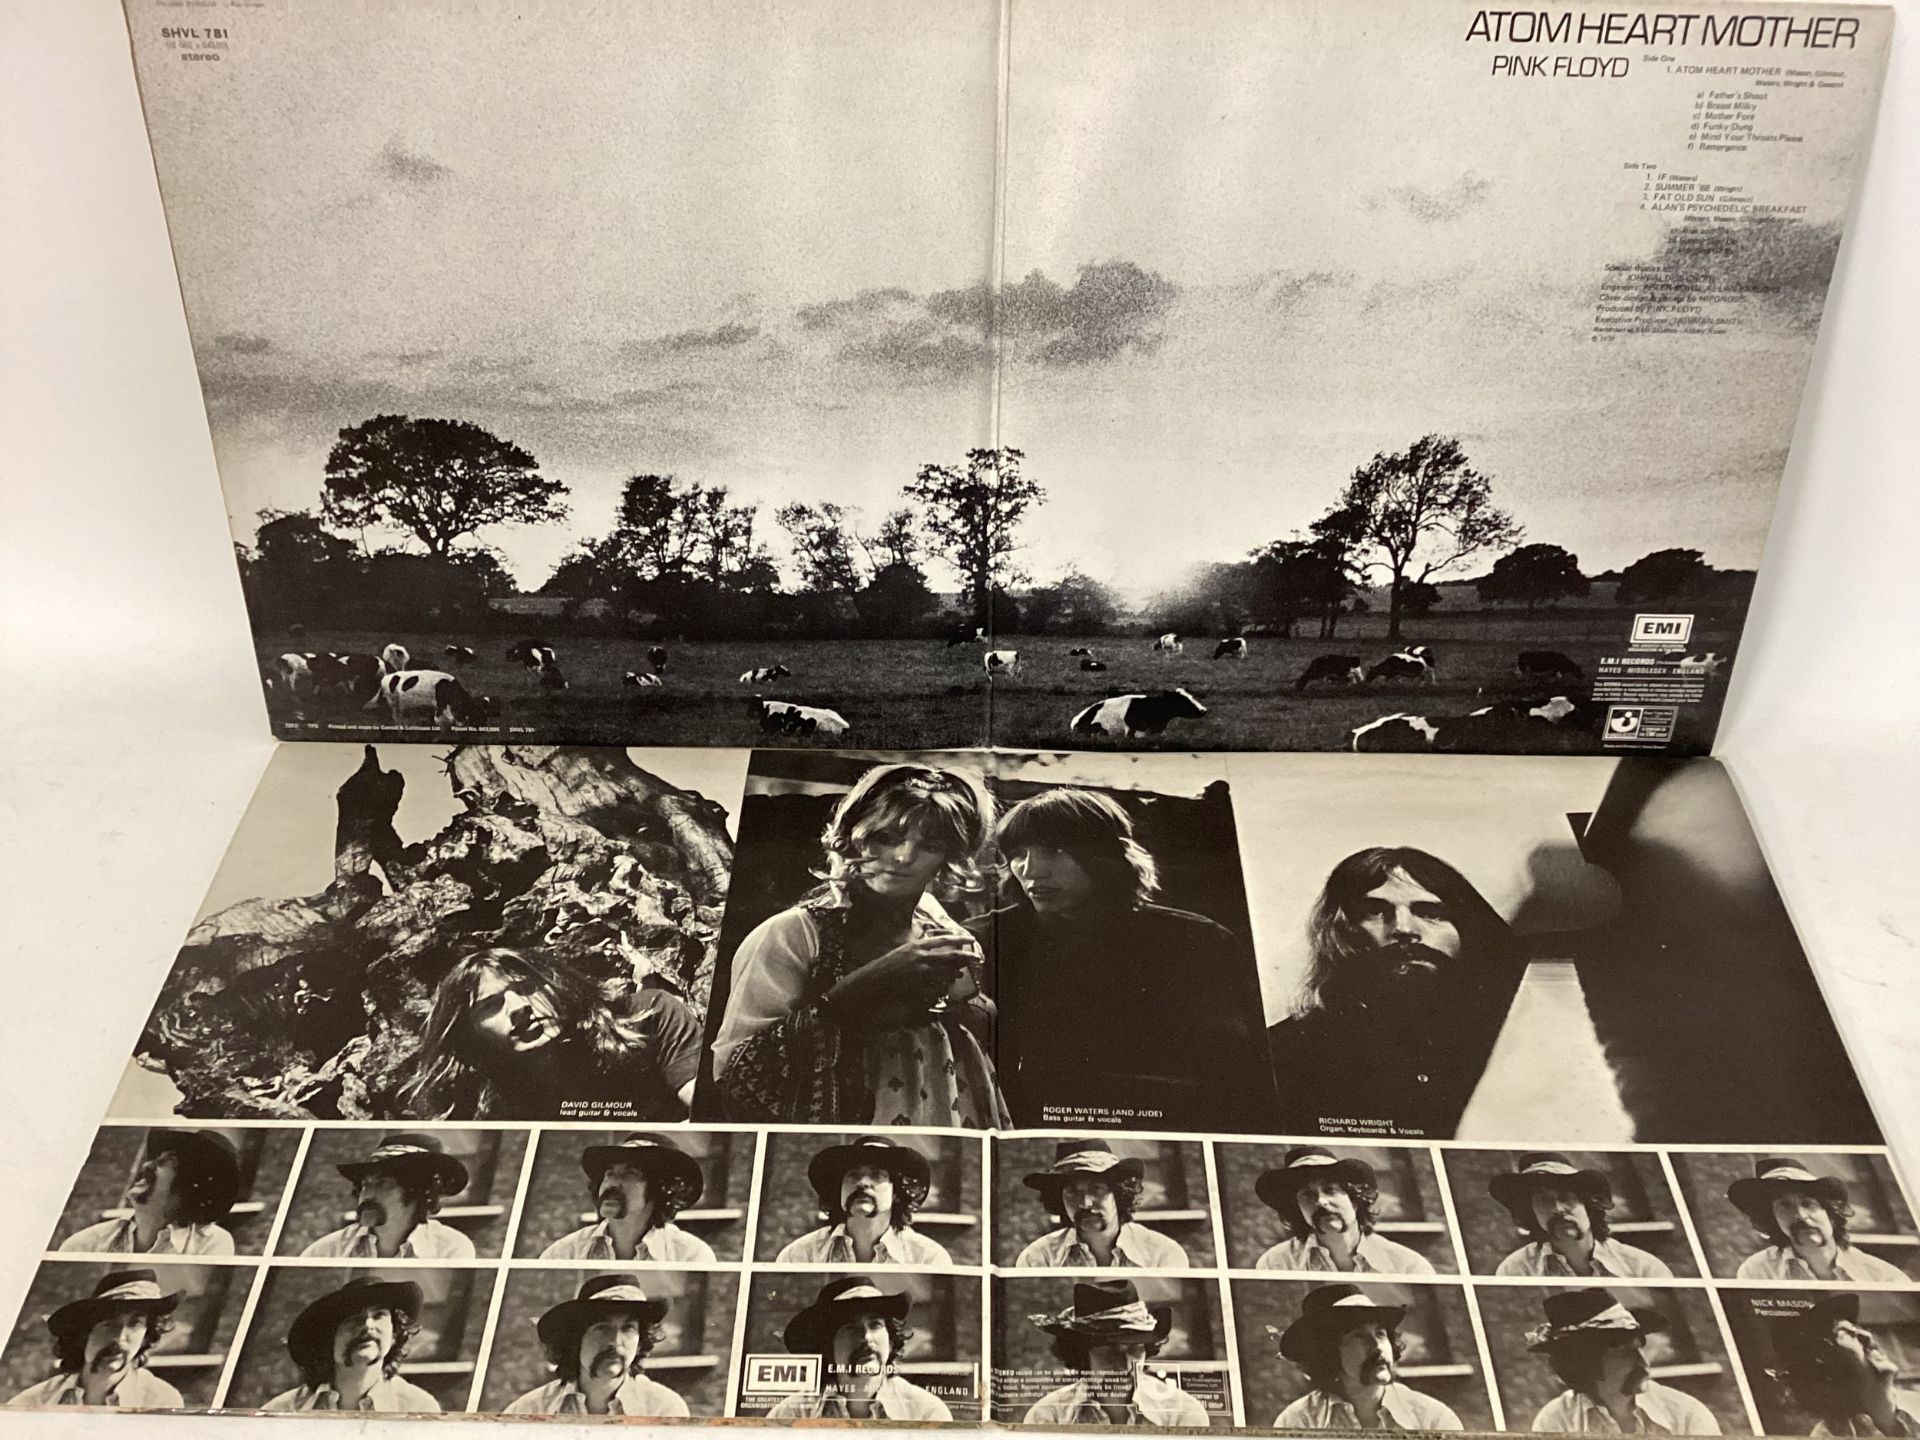 PINK FLOYD VINYL LP RECORDS X 6. Titles here include - Meddle in Gatefold textured sleeve SHVL 795 - Image 4 of 4